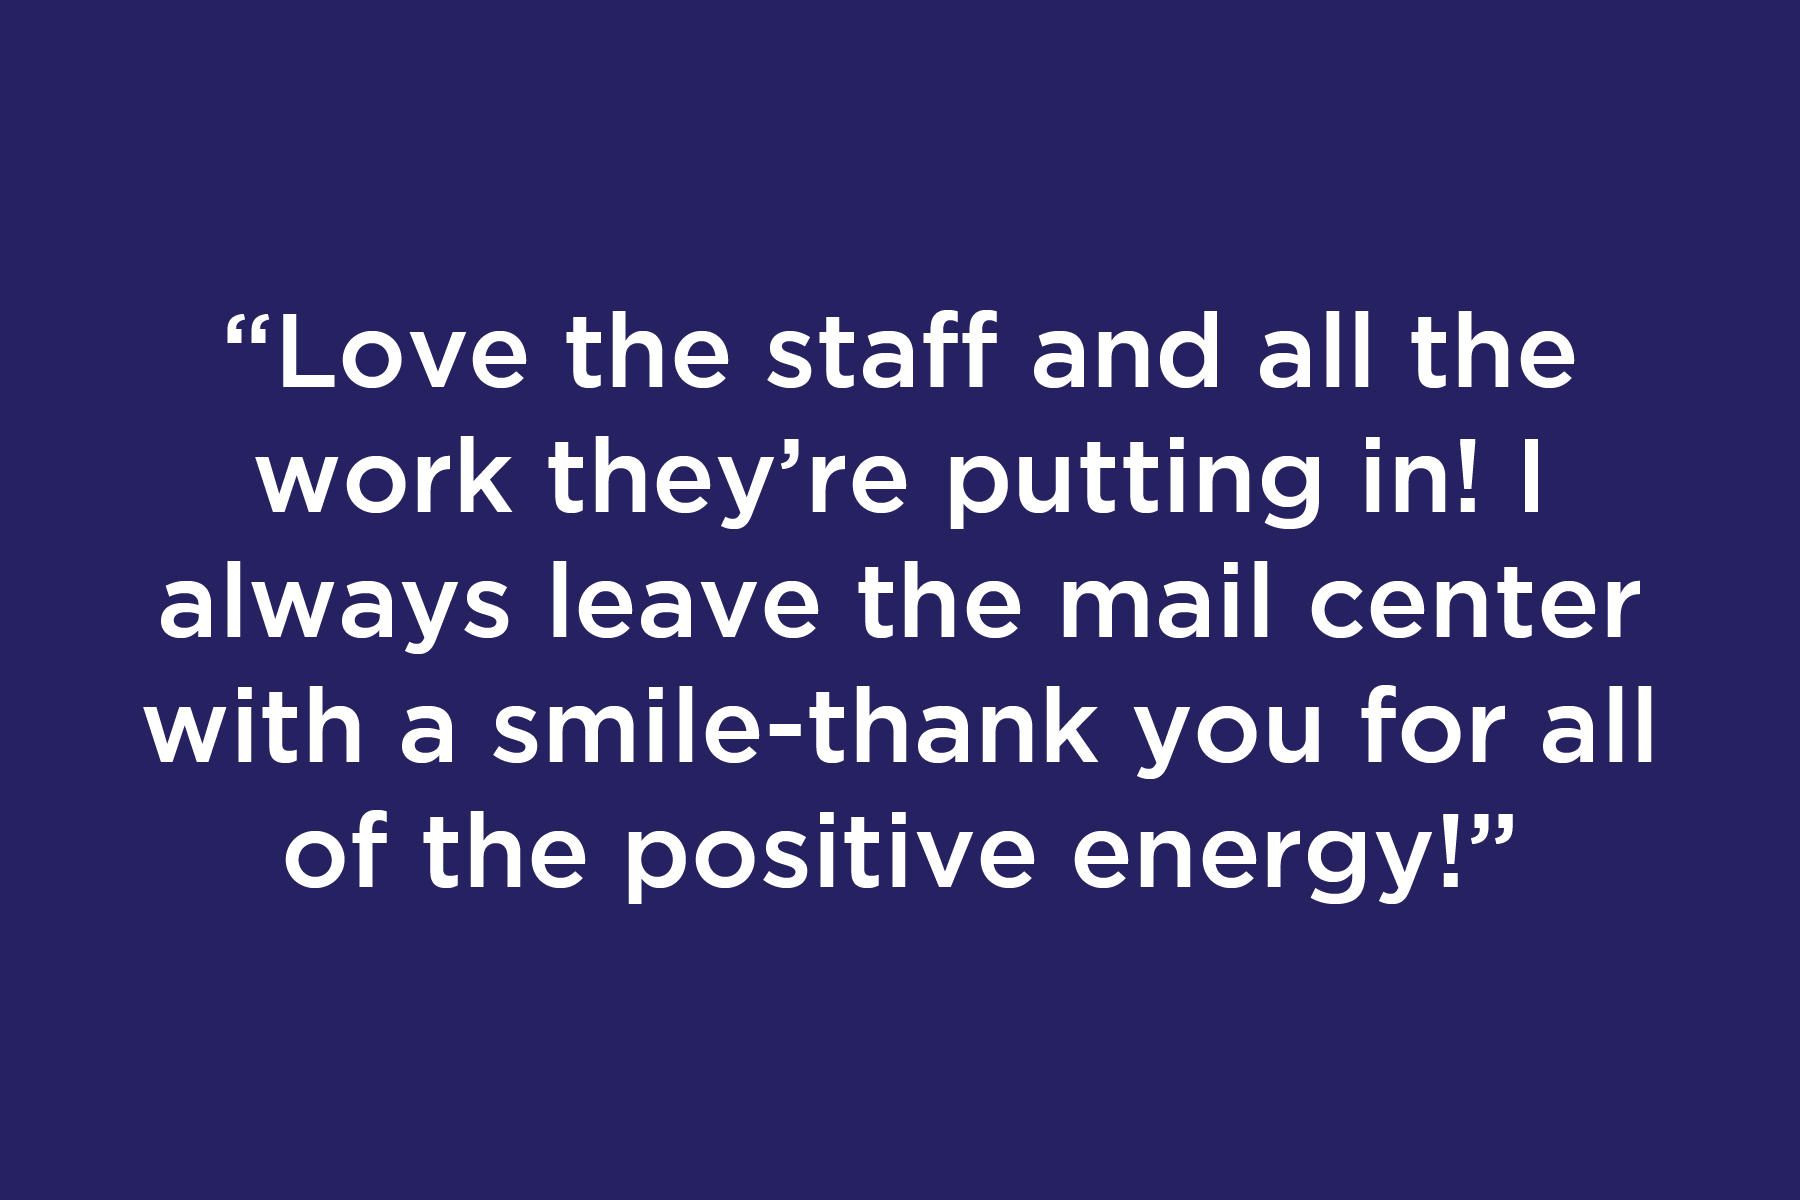 Love the staff and all the work they’re putting in! I always leave the mail center with a smile-thank you for all of the positive energy!